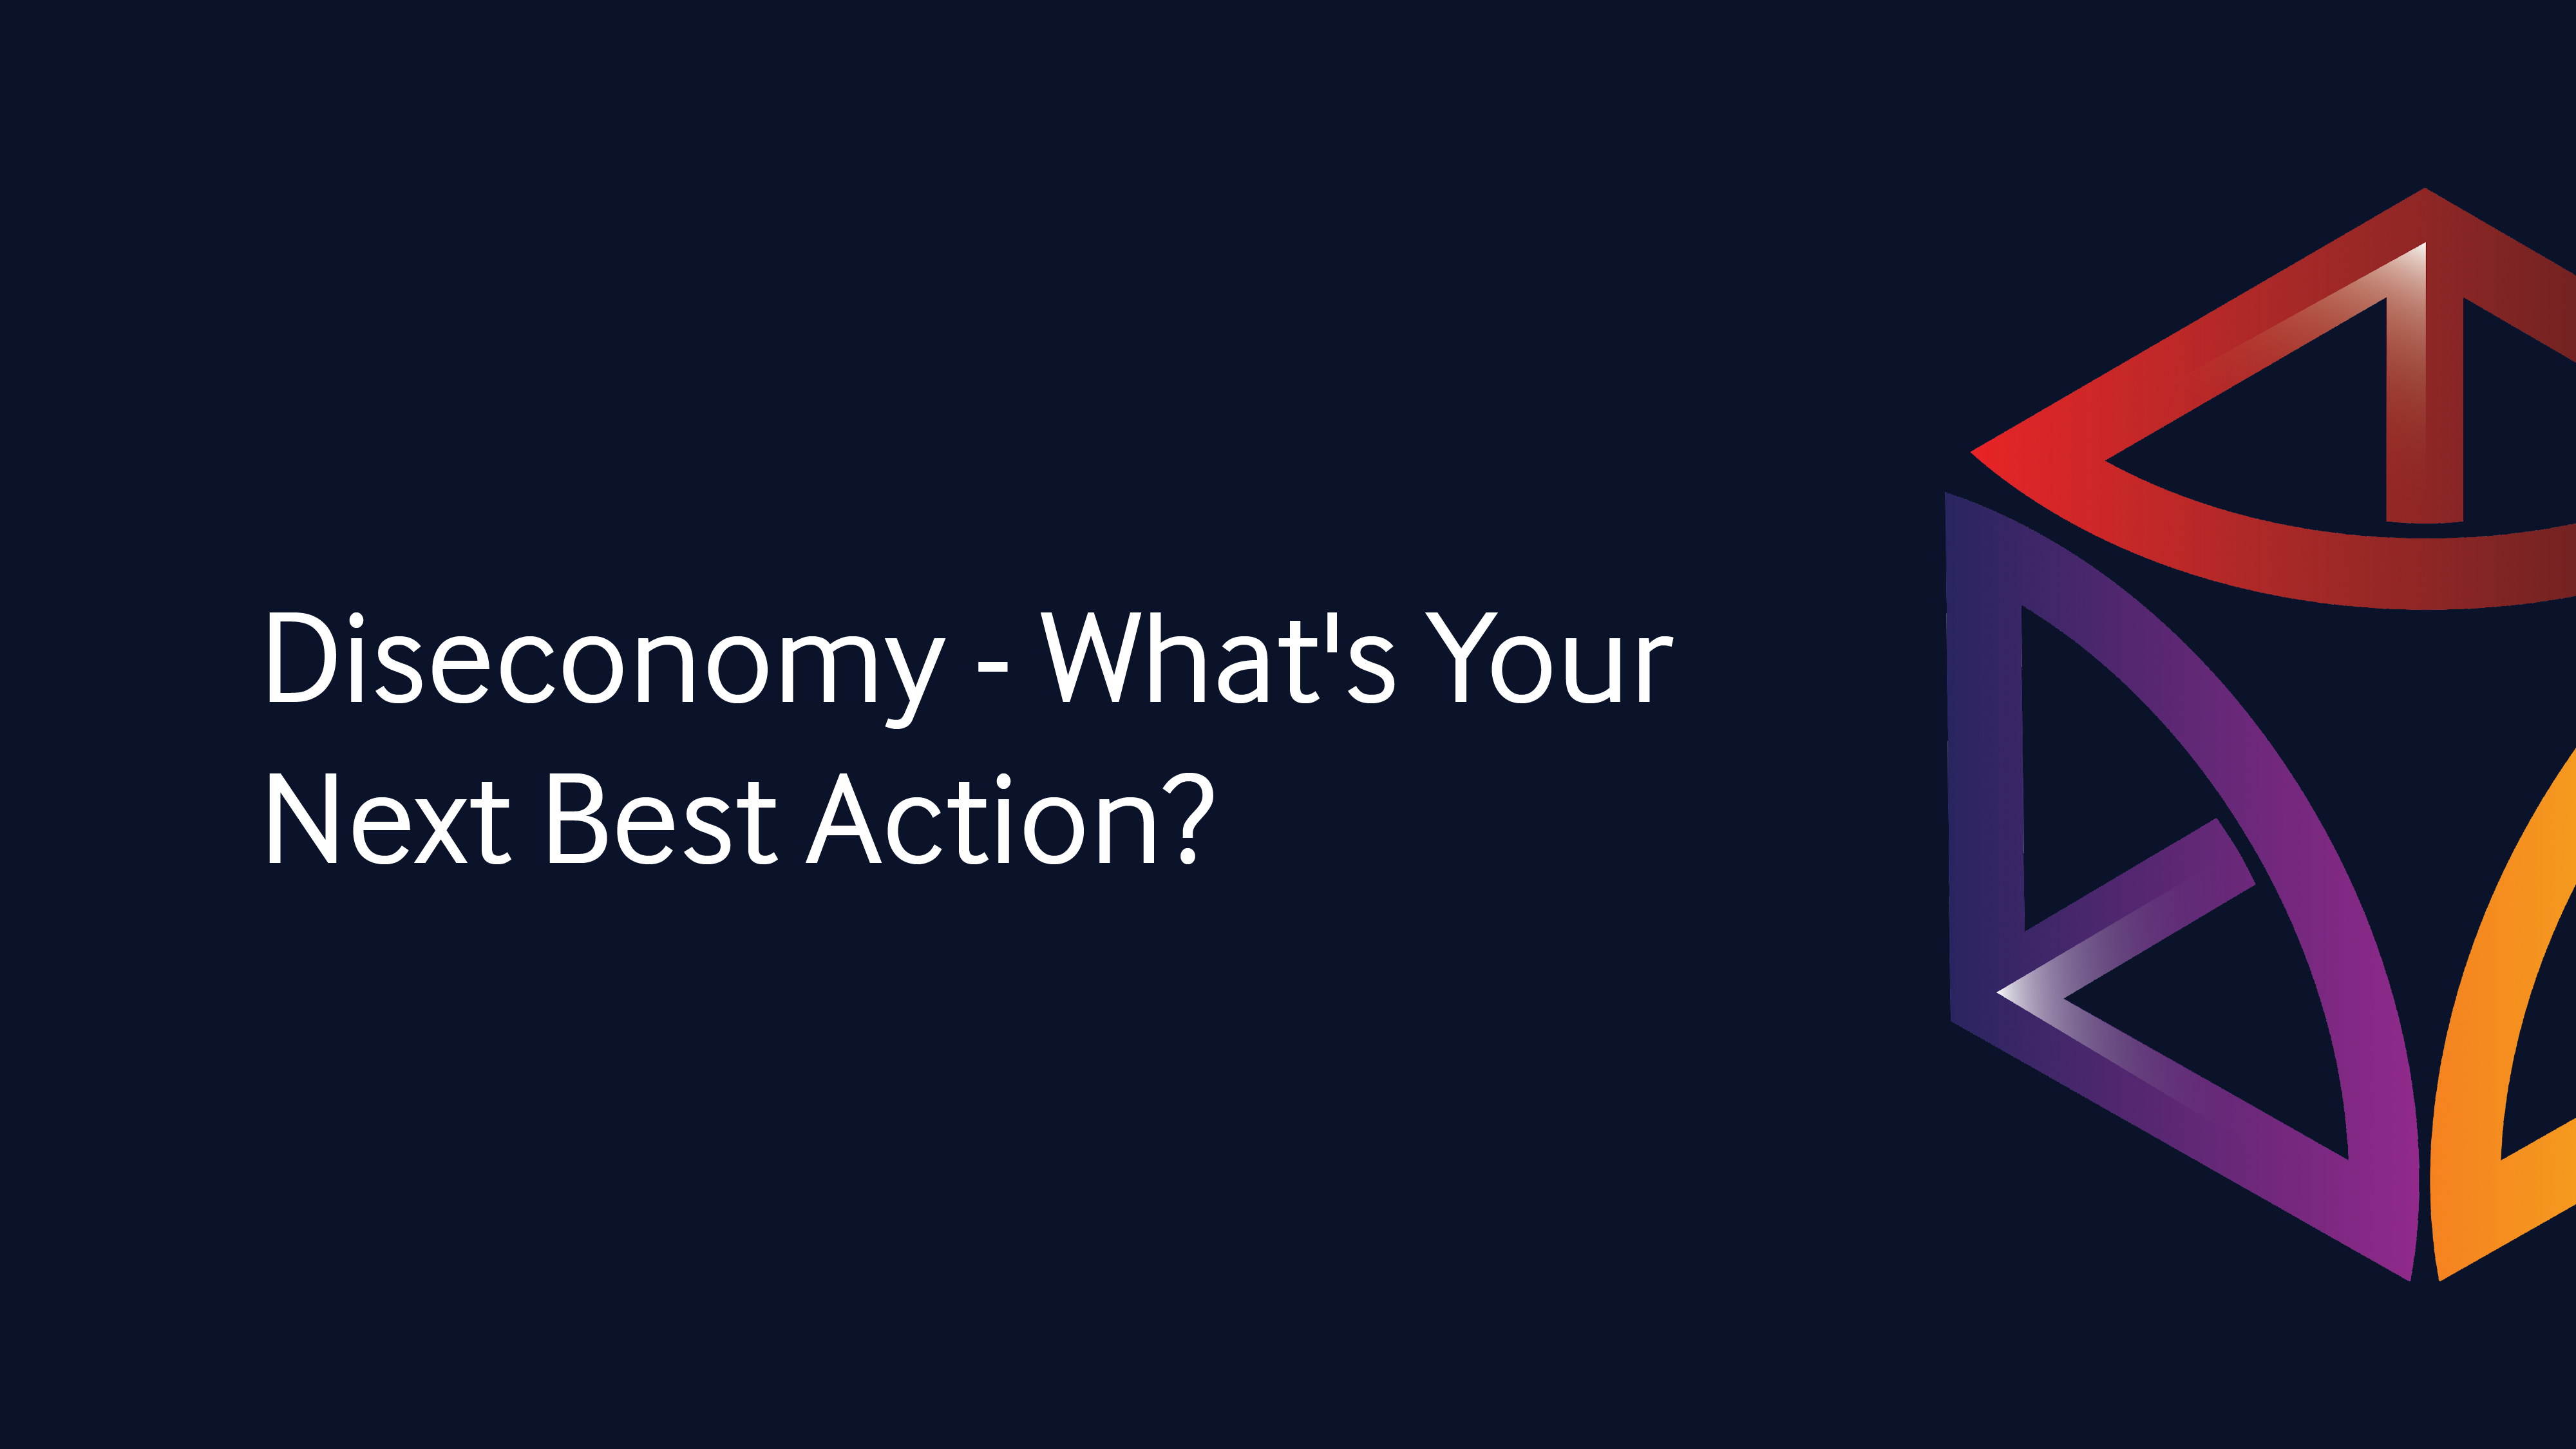 Diseconomy - What's Your Next Best Action?